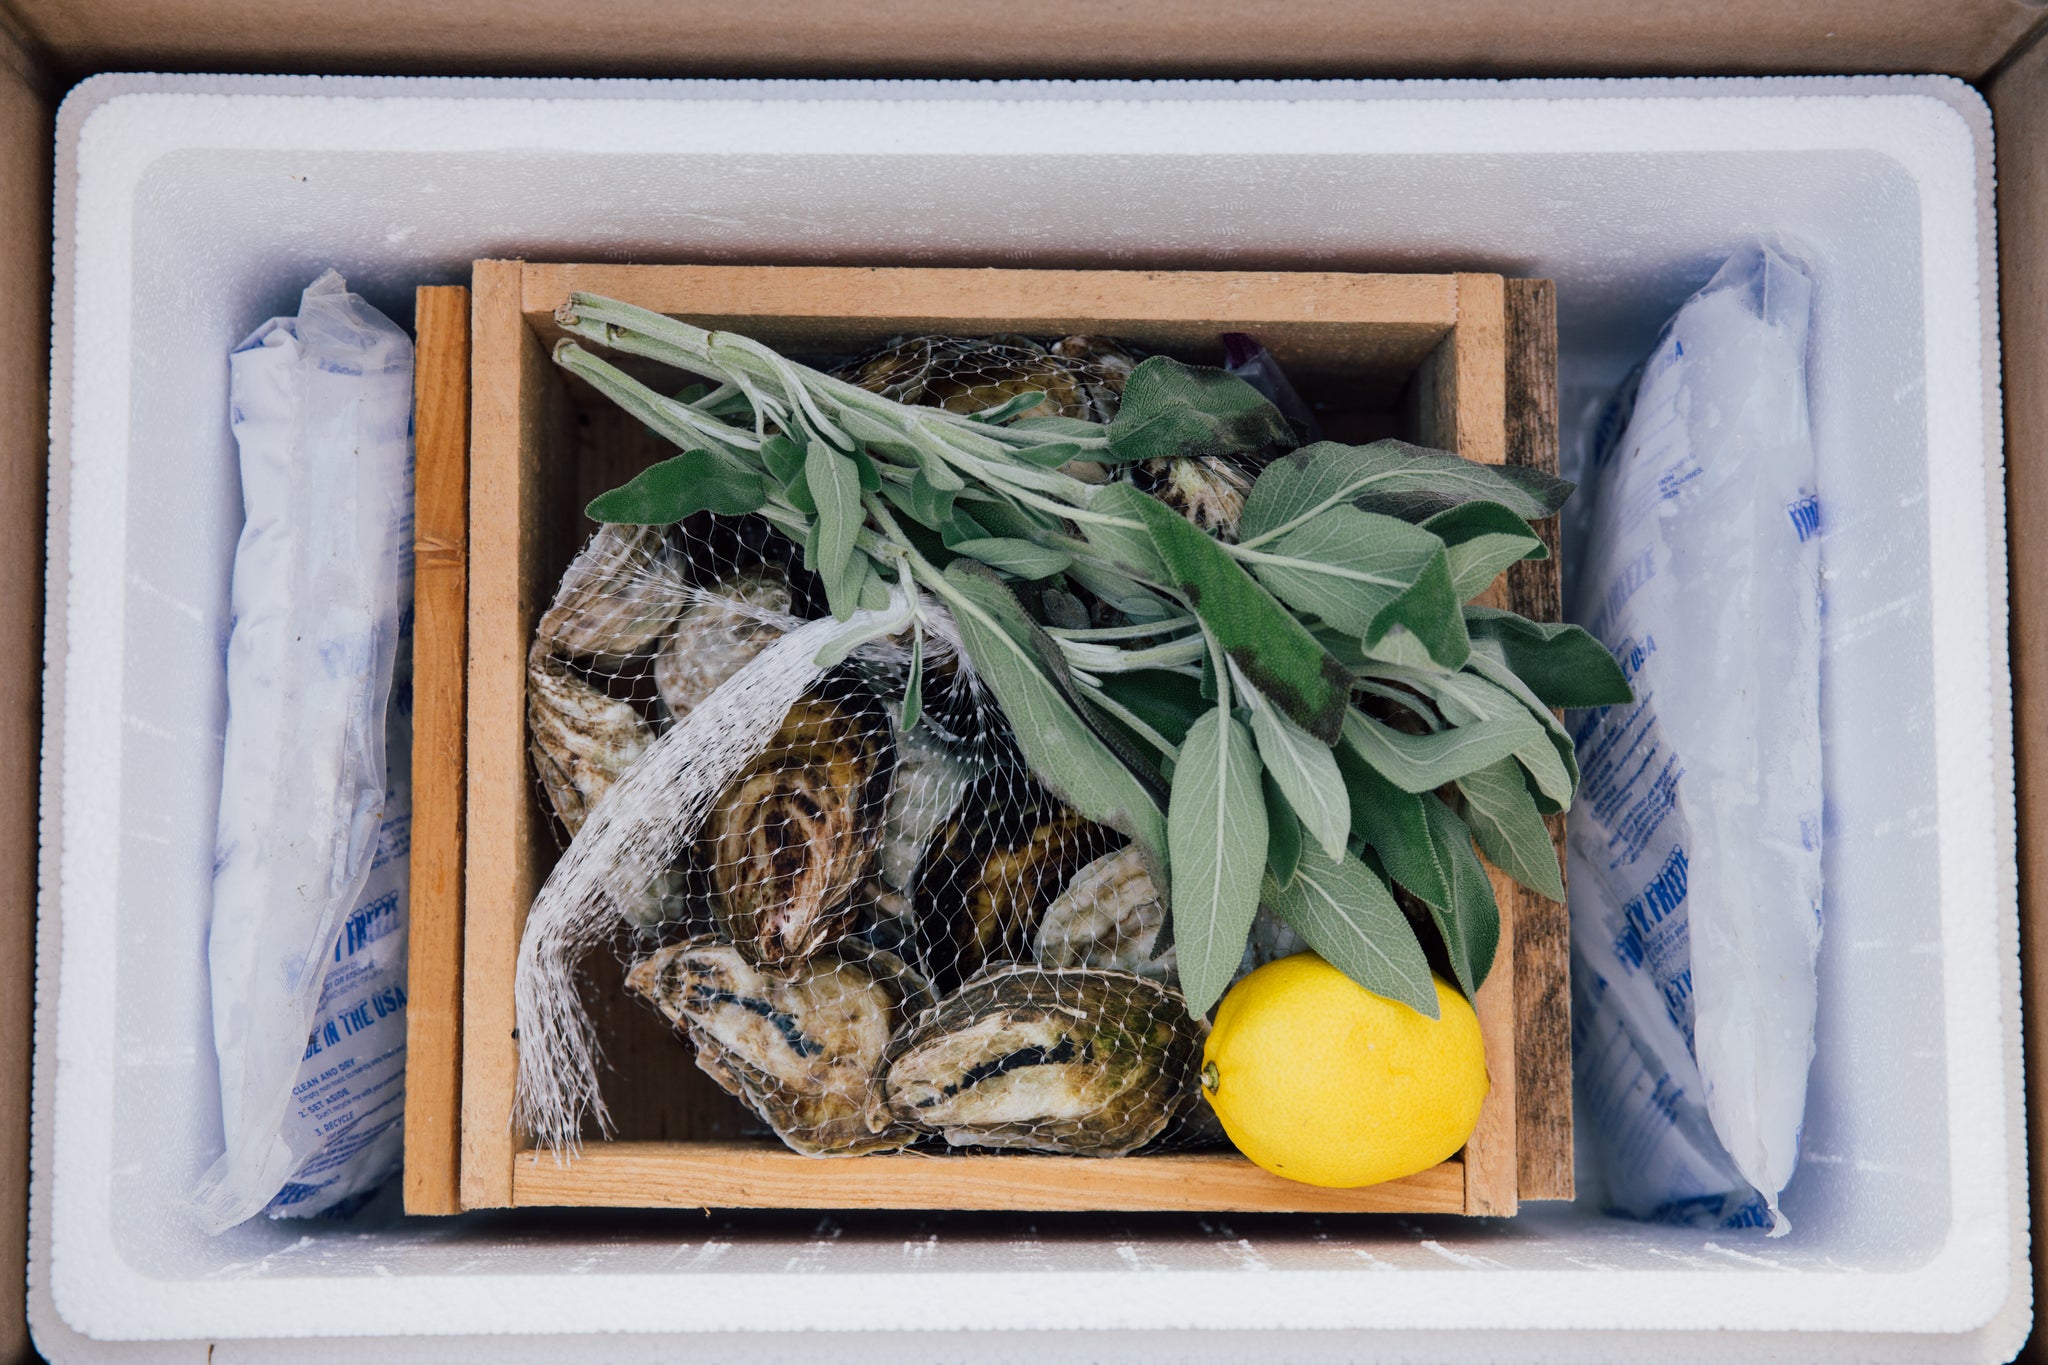 Roast Pan + Butter Kit – Barnegat Oyster Collective